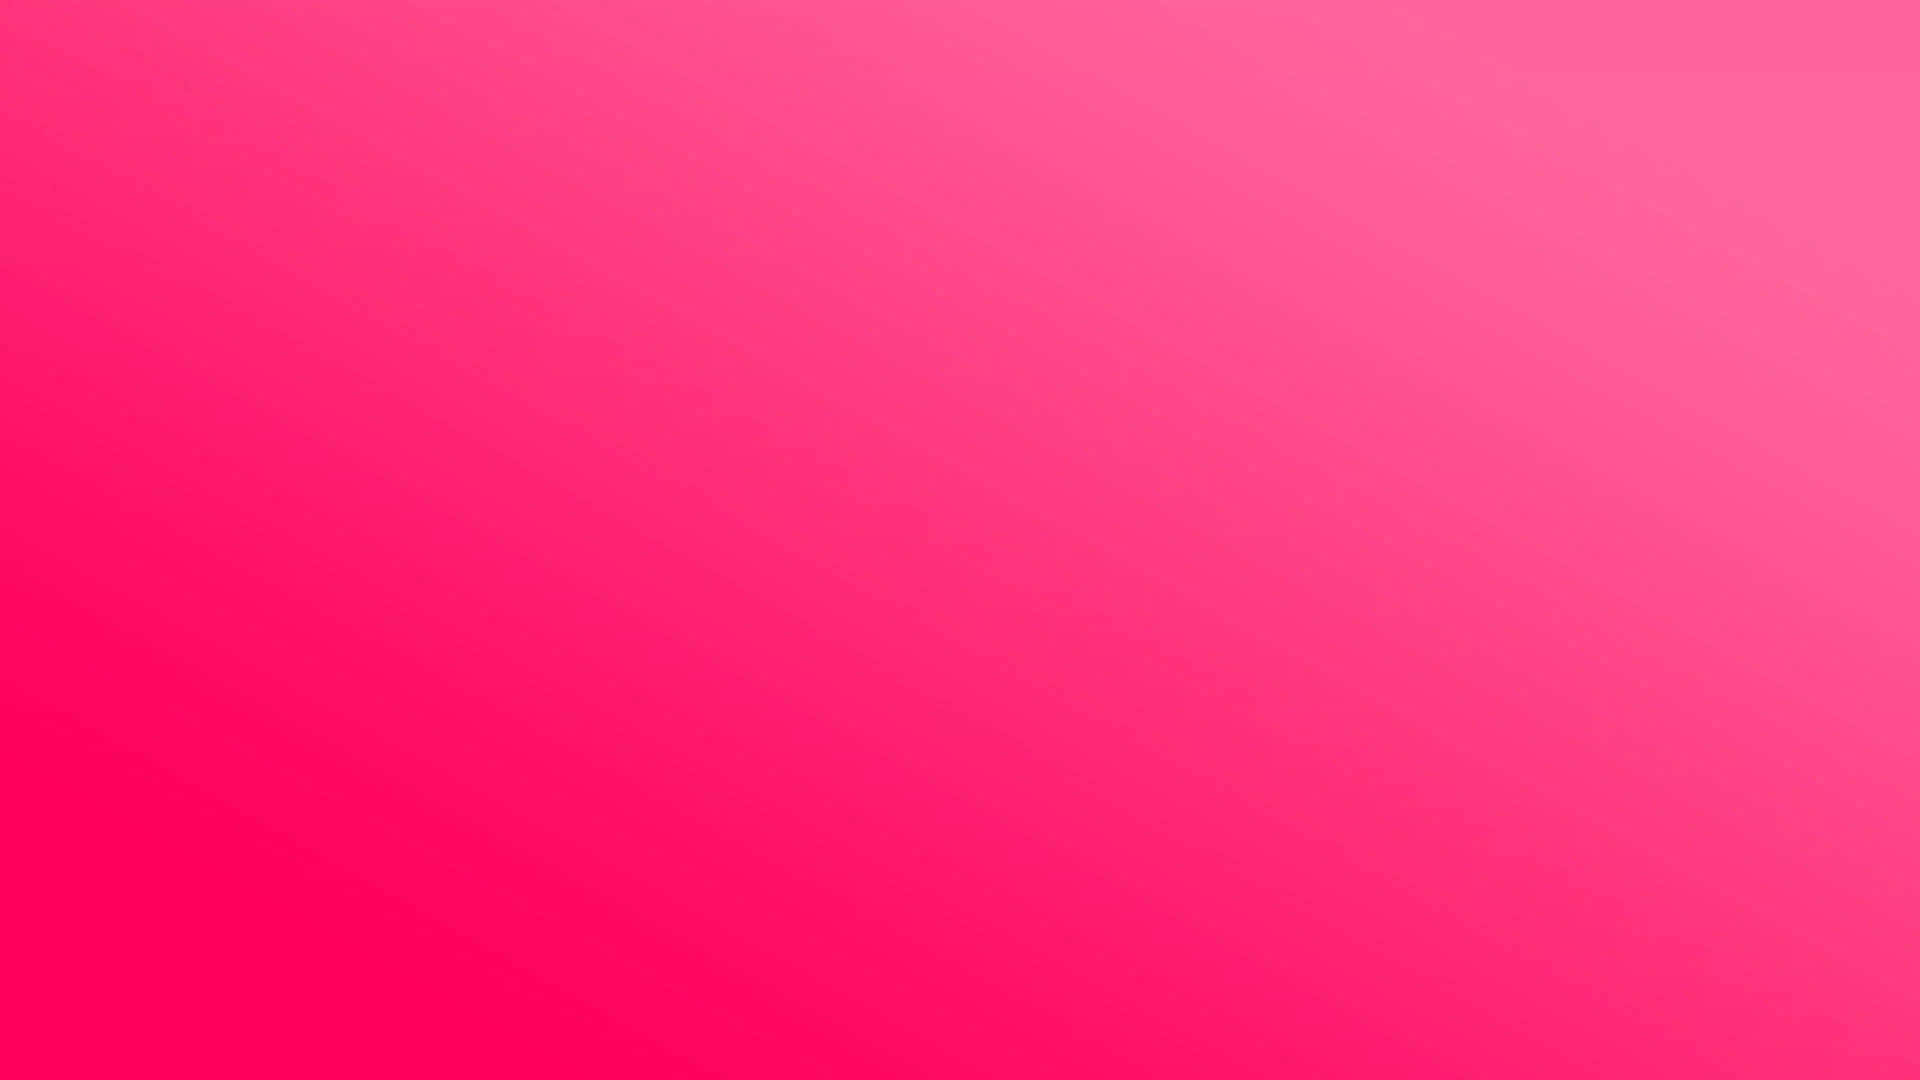 Simple Pink Ombre Wallpaper